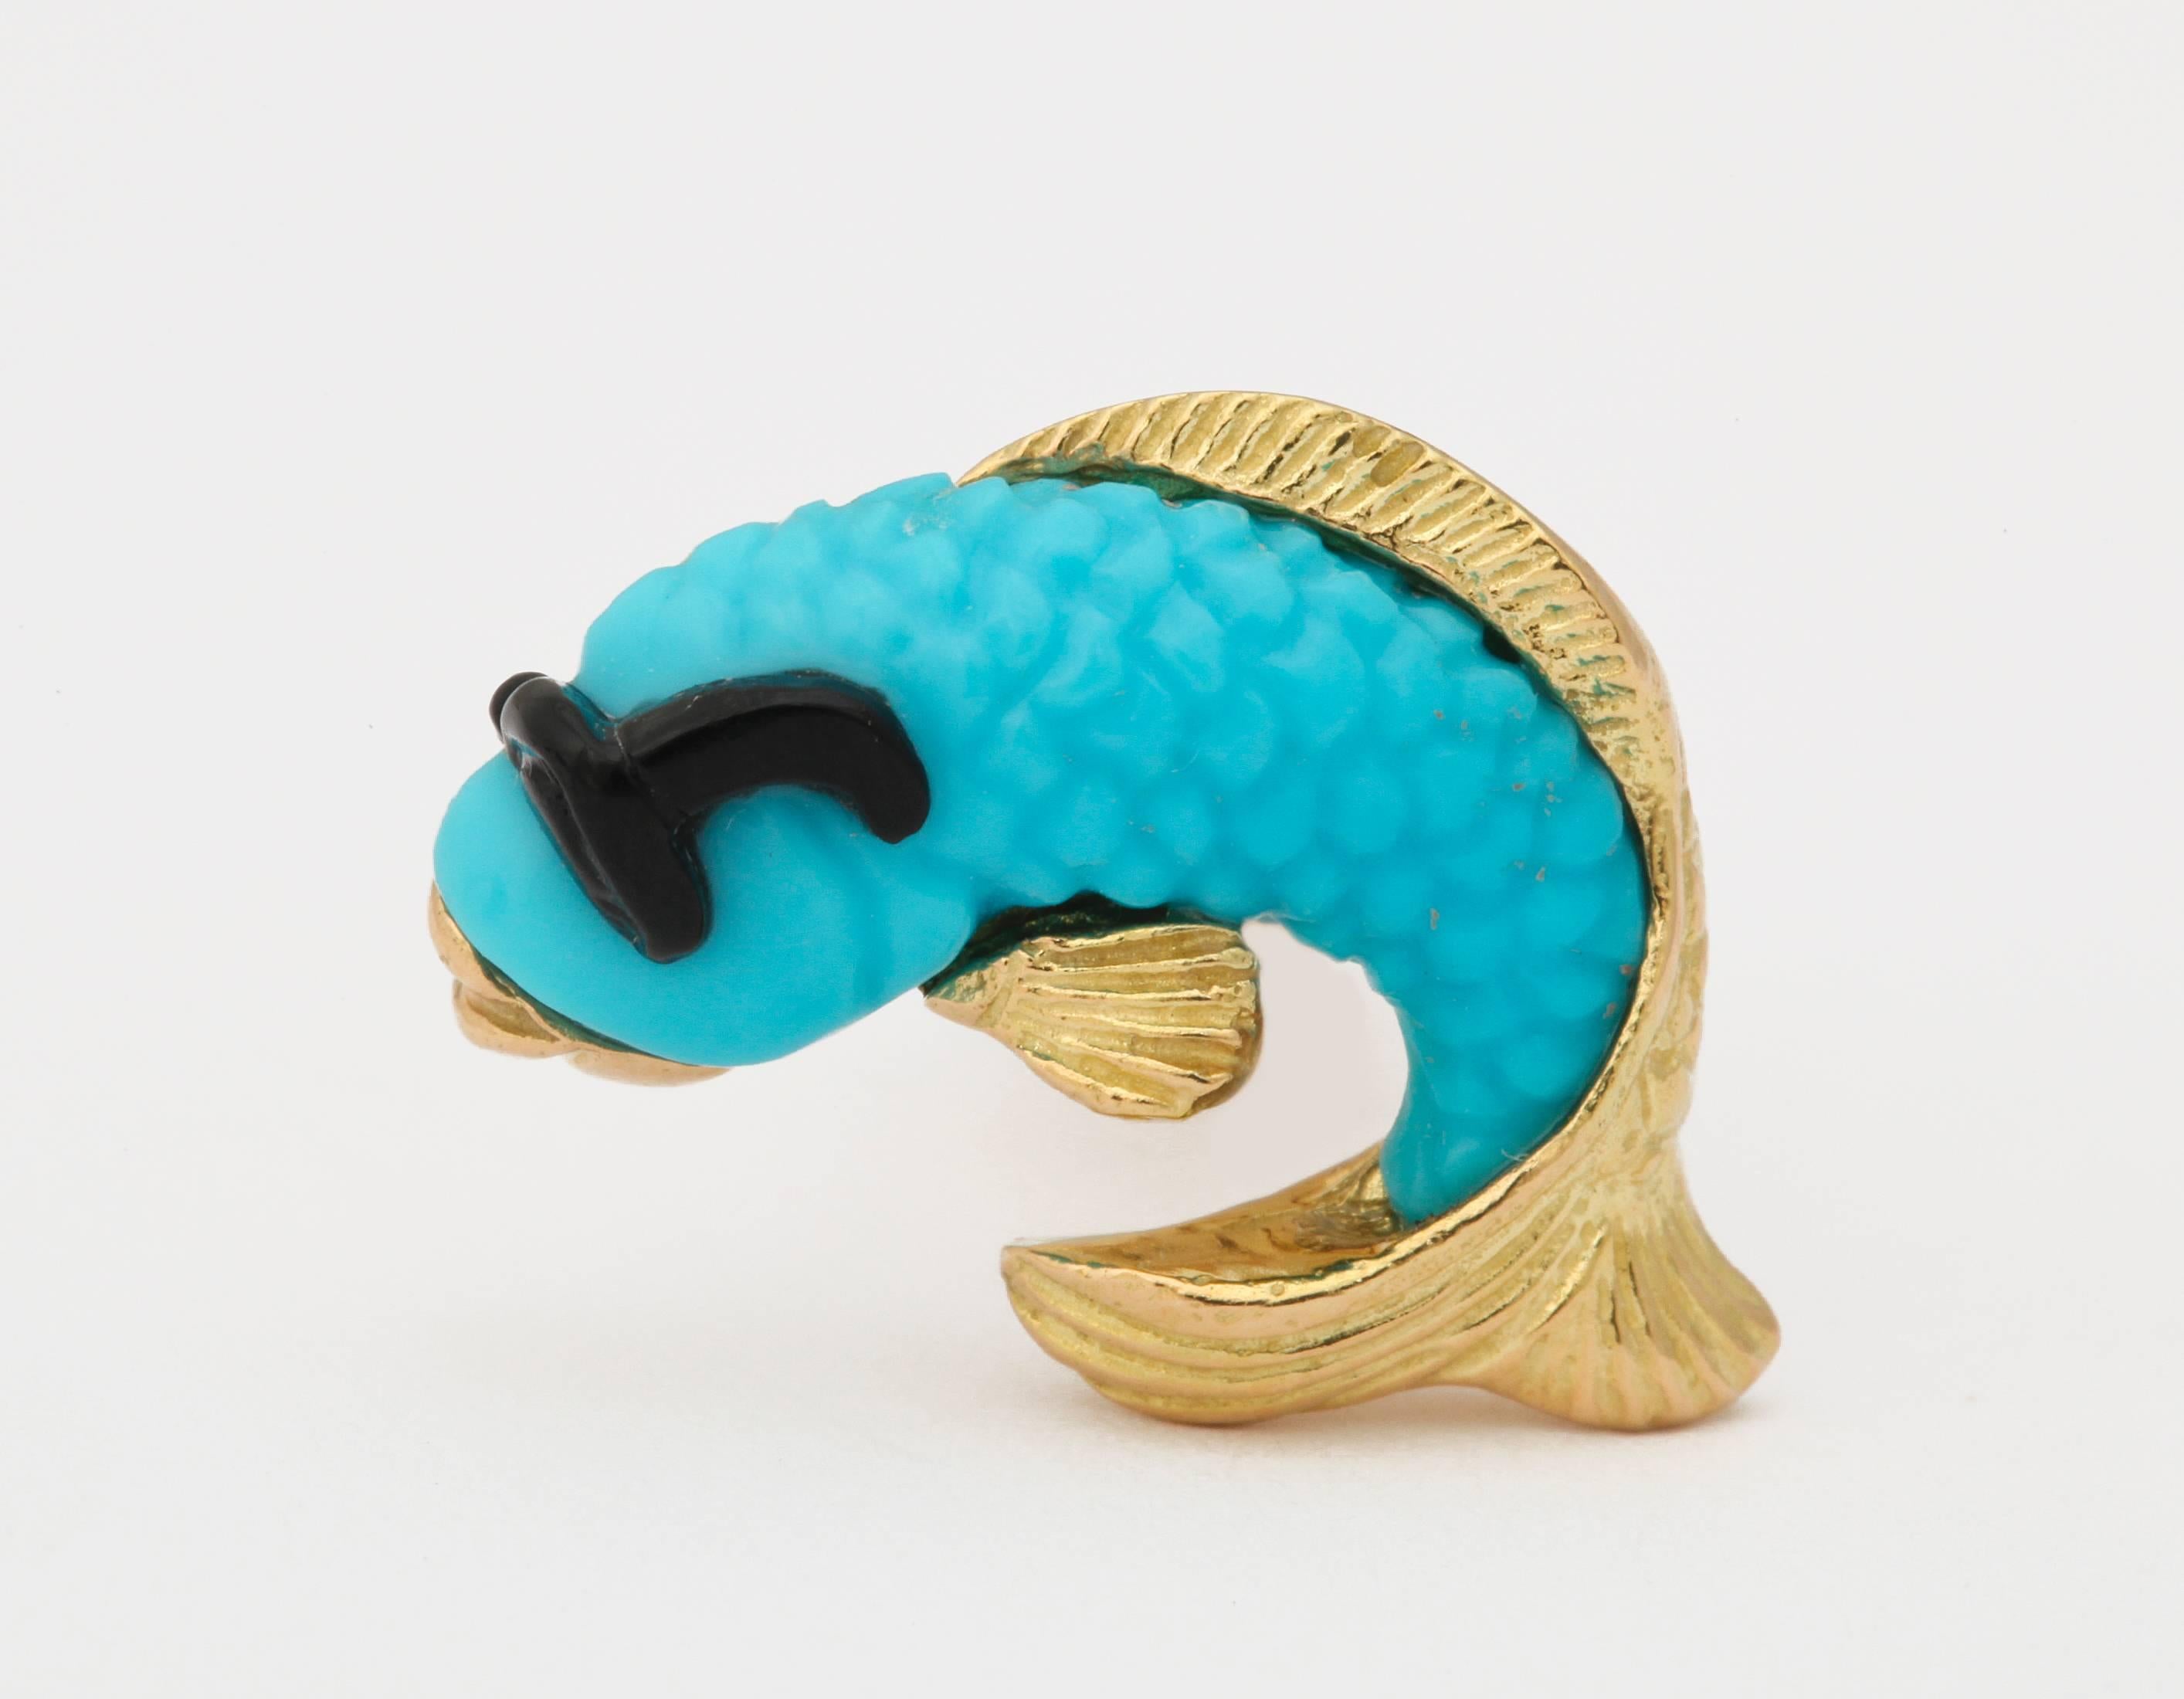 Look once at these cufflinks and you'll see the vibrant, blue turquoise.  Look twice and you'll see that the fish is wearing black onyx sunglasses.  Elegance with just the right amount of humor.  All mounted in 18kt gold and made in